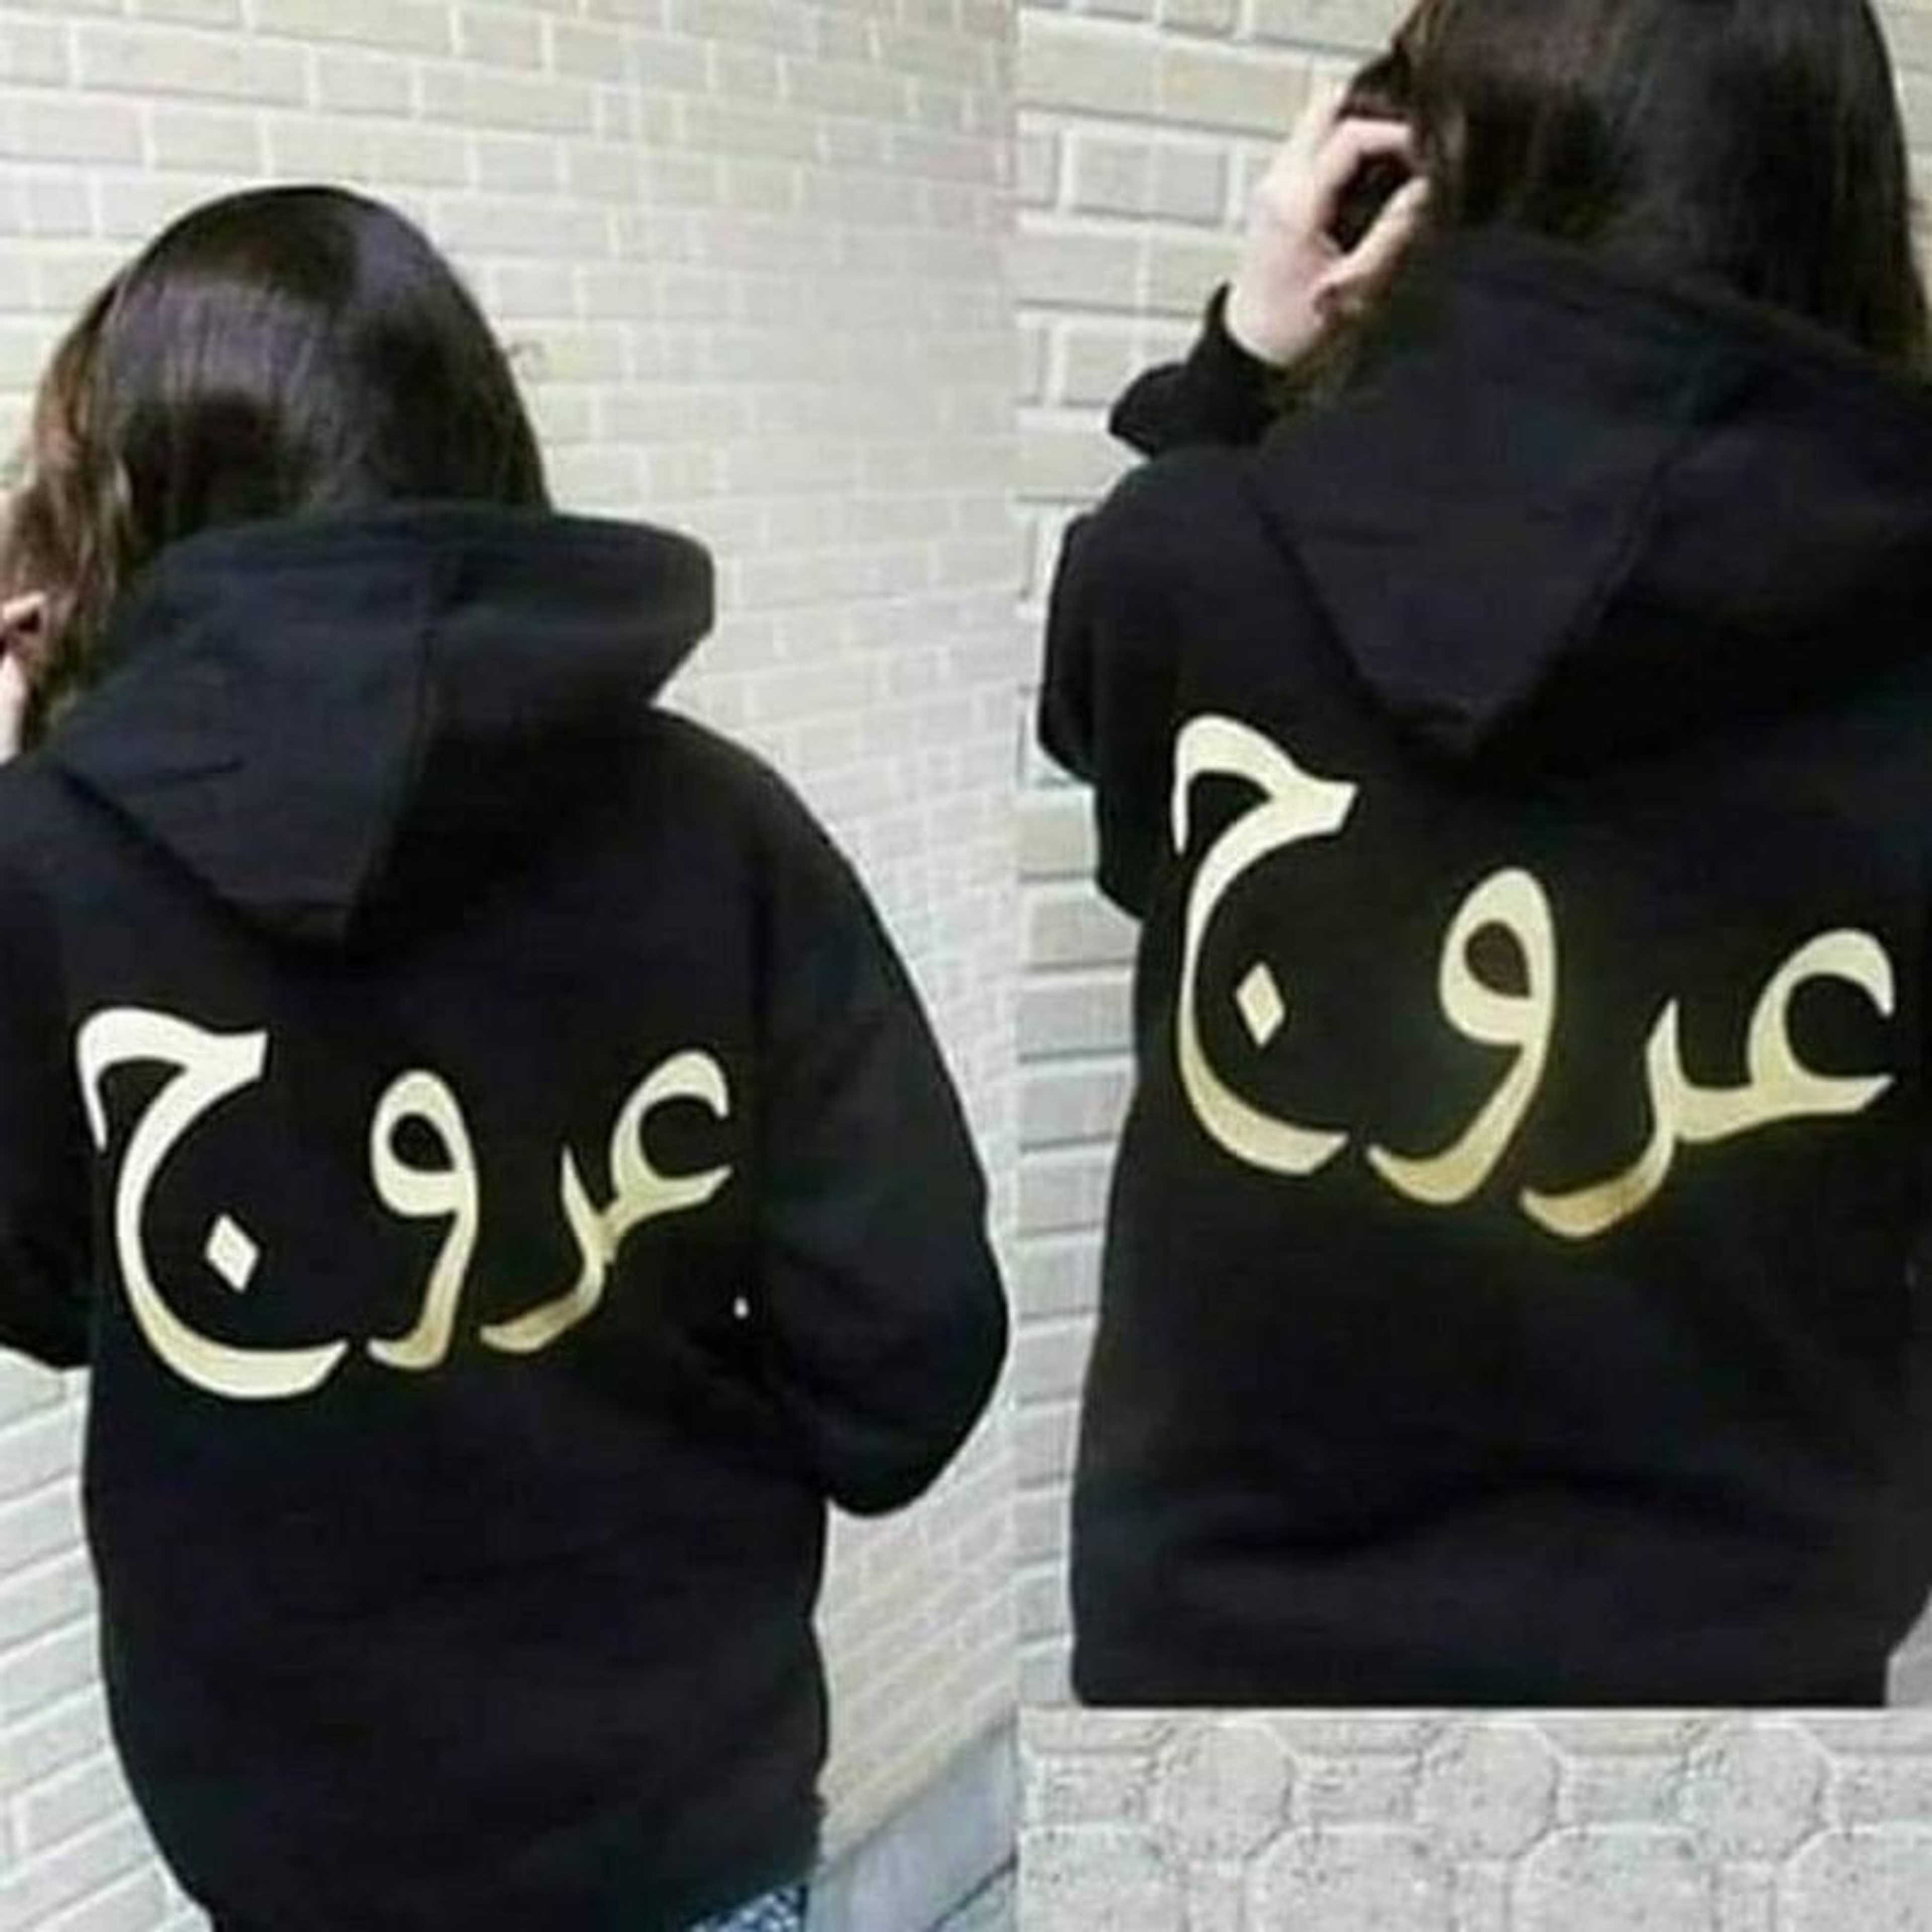 Customized Hoodie With Your Name Printed On It